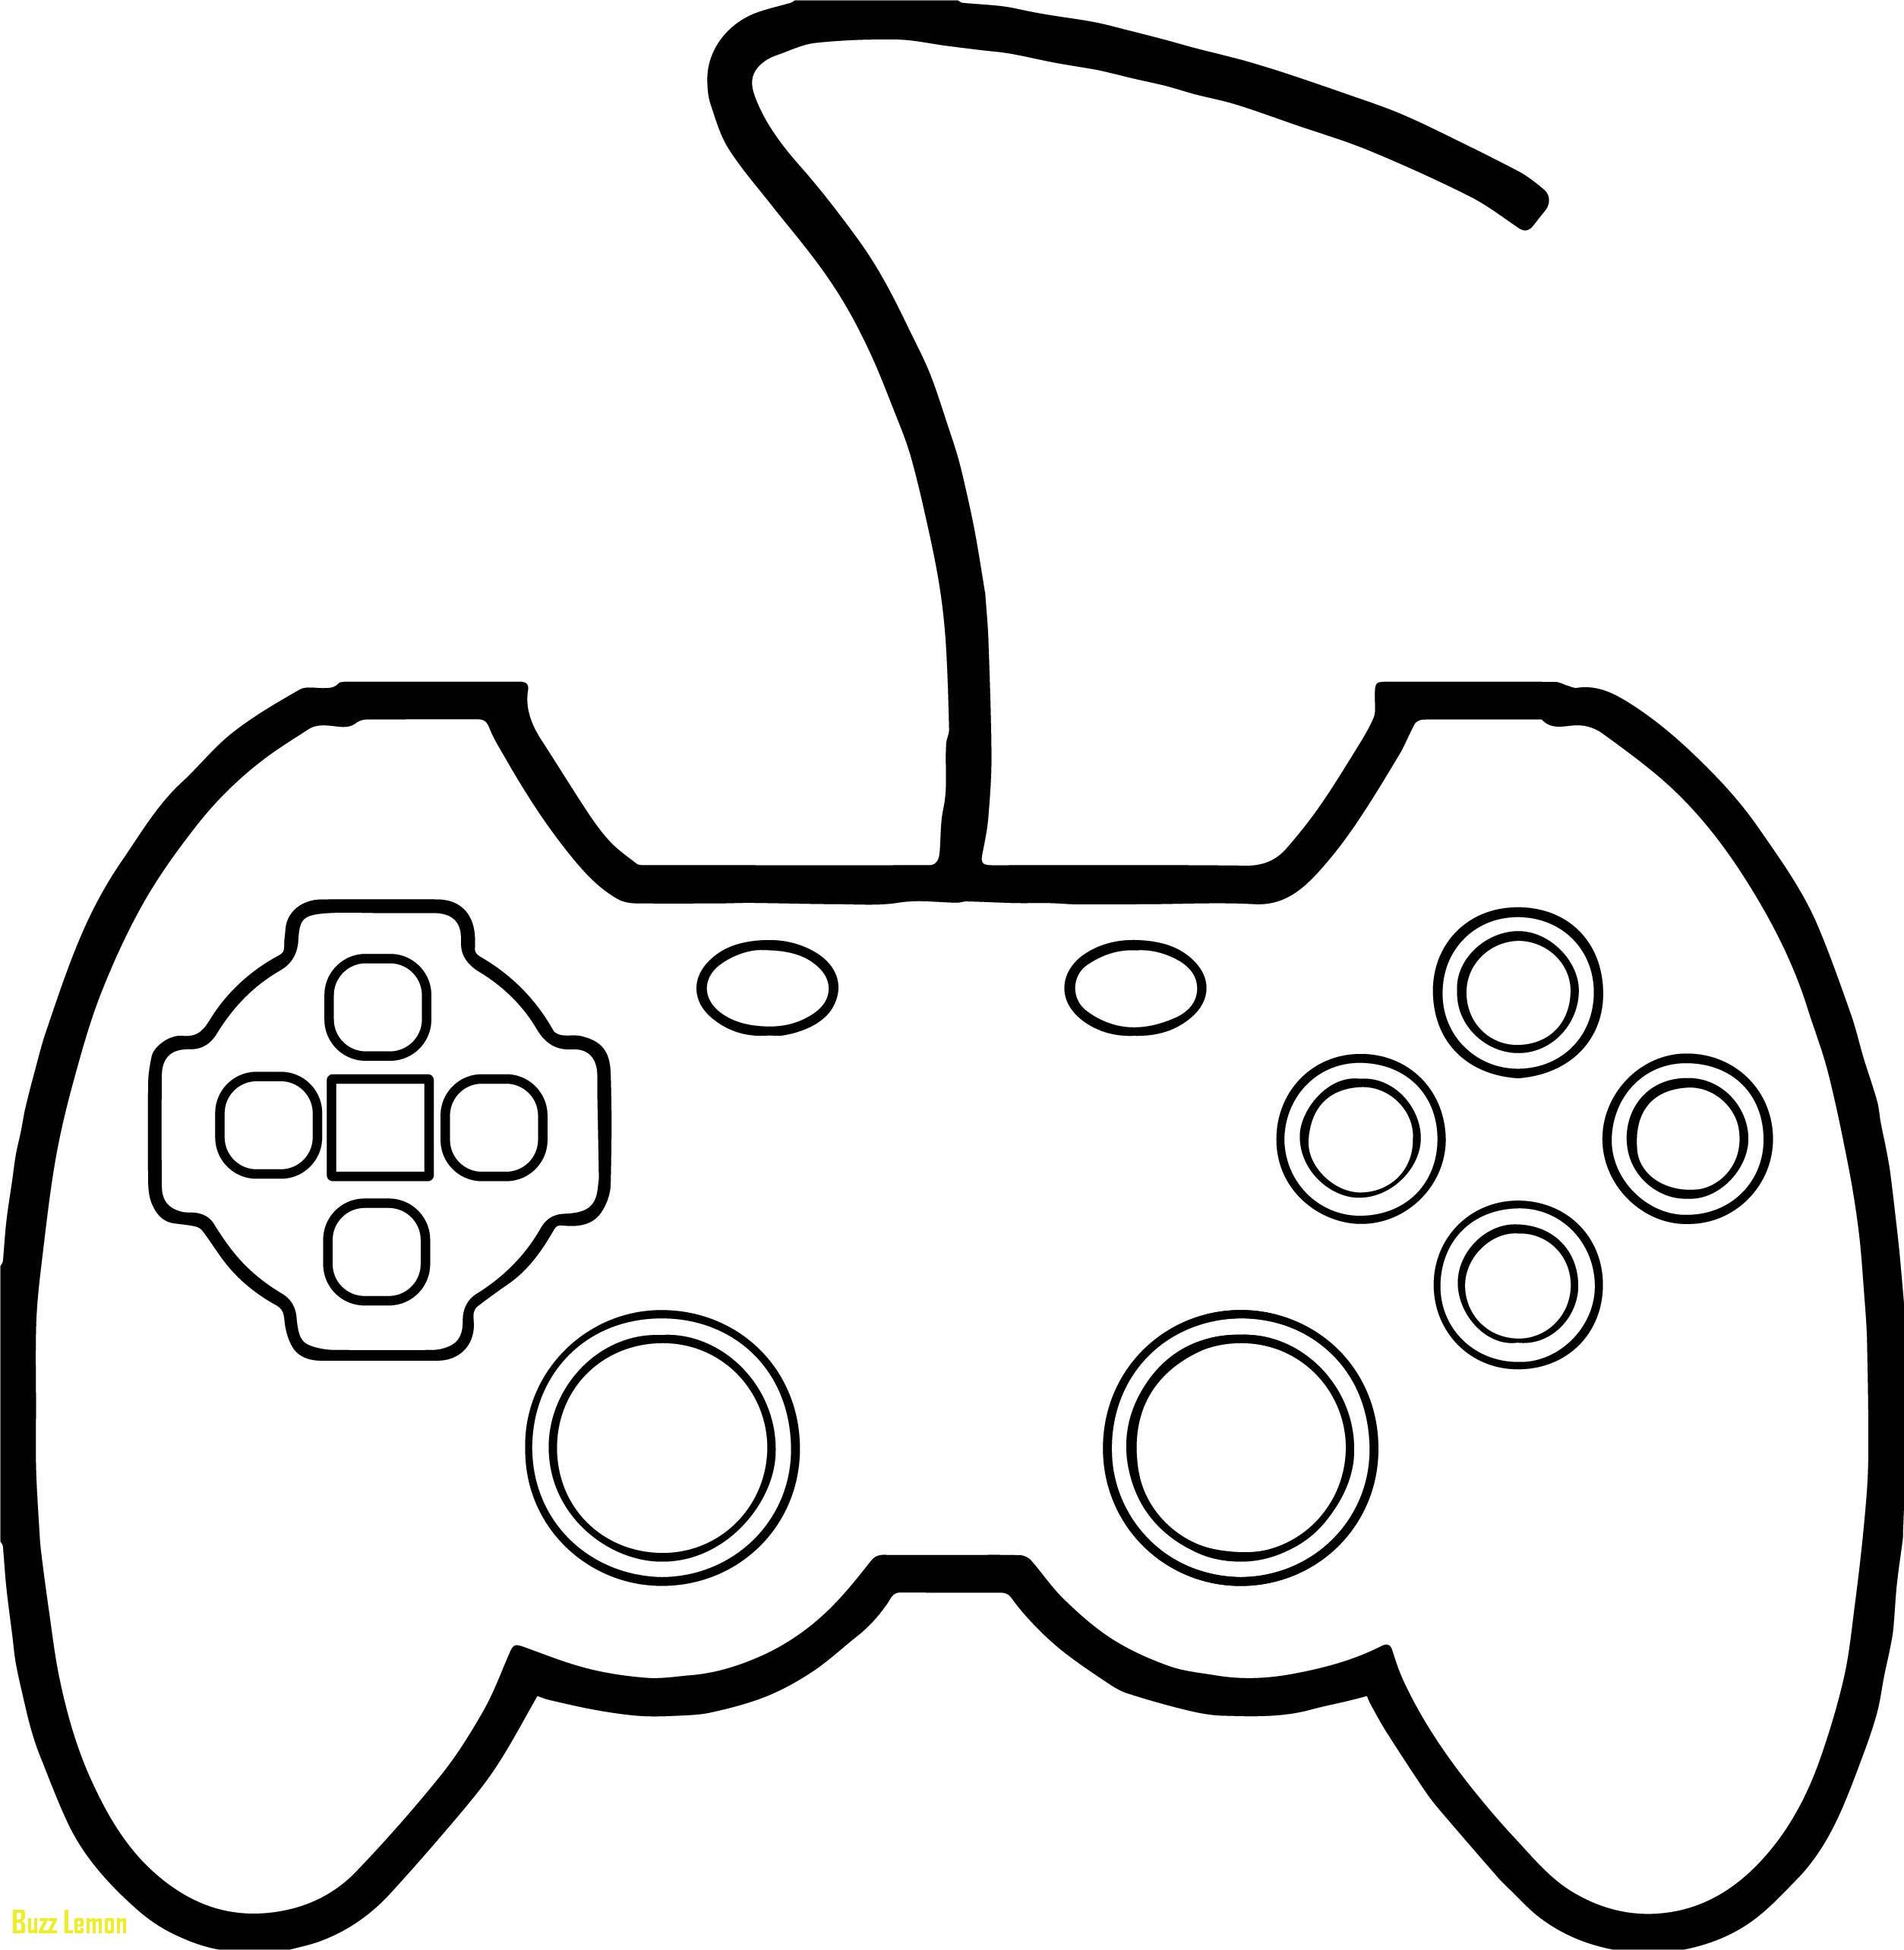 Xbox Coloring Pages At Getcolorings Free Printable Colorings